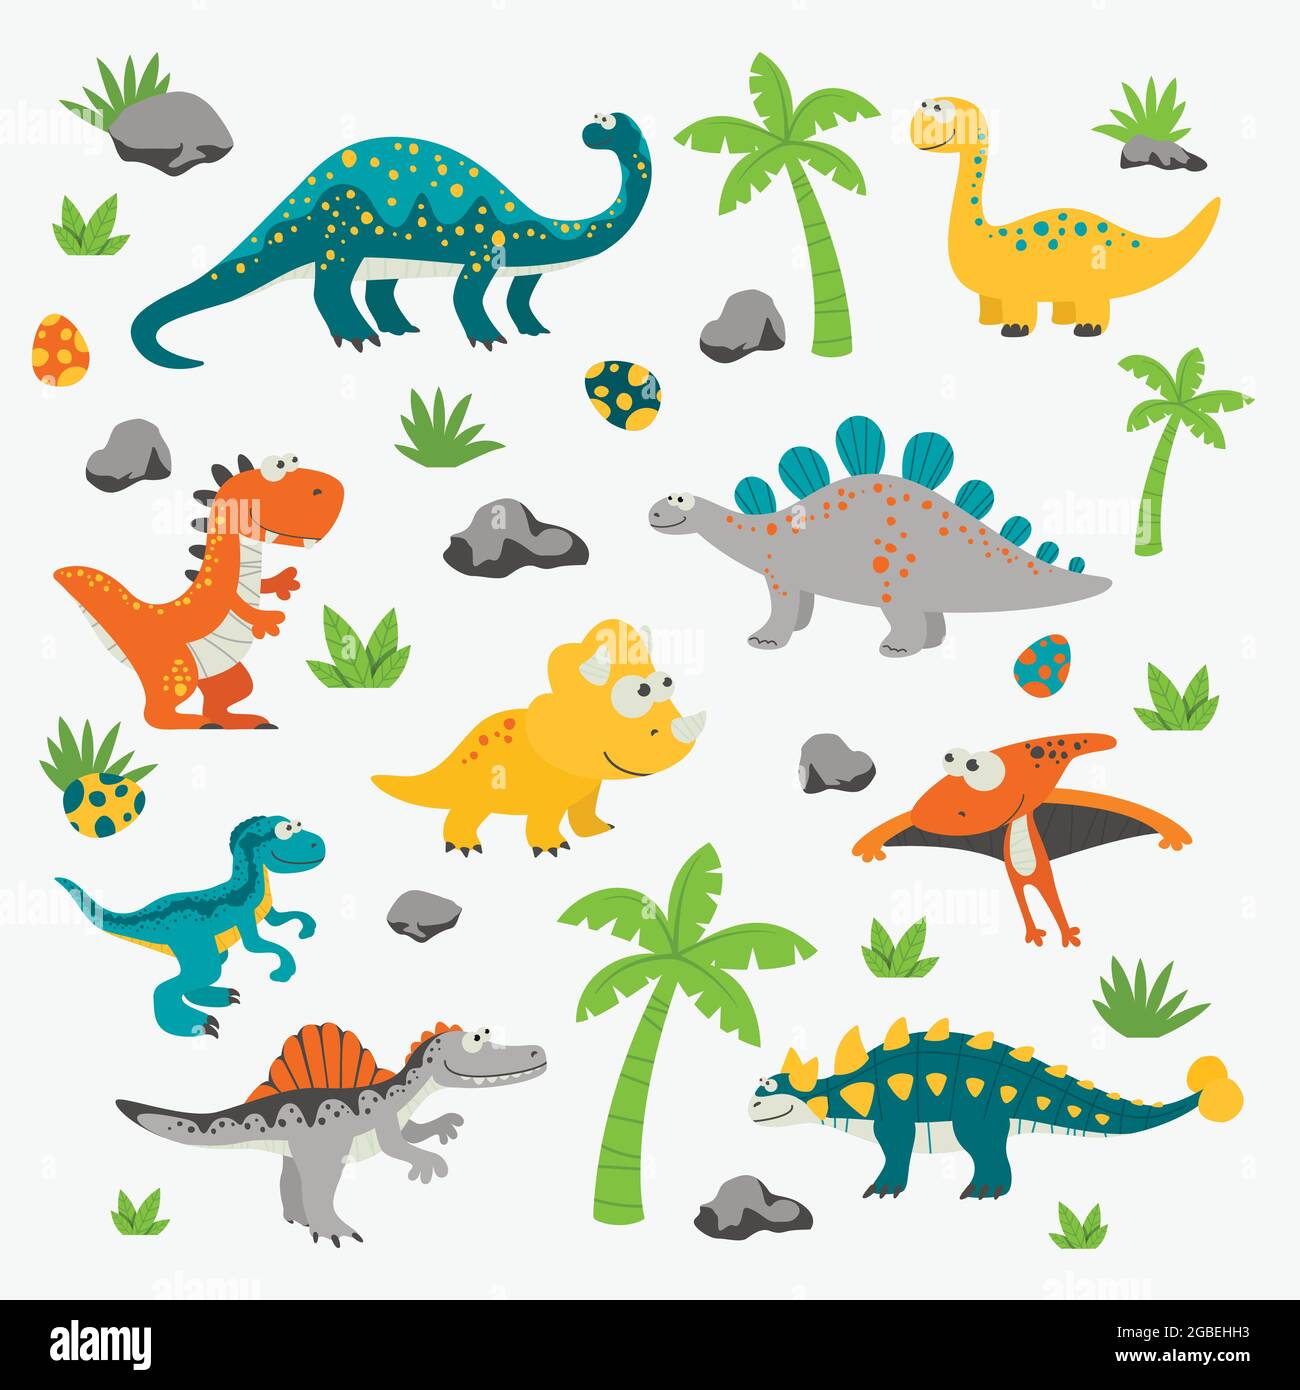 Two Cute And Funny Baby Dinosaur Characters Stegosaurus And Pterodactyloidea  Stock Illustration - Download Image Now - iStock